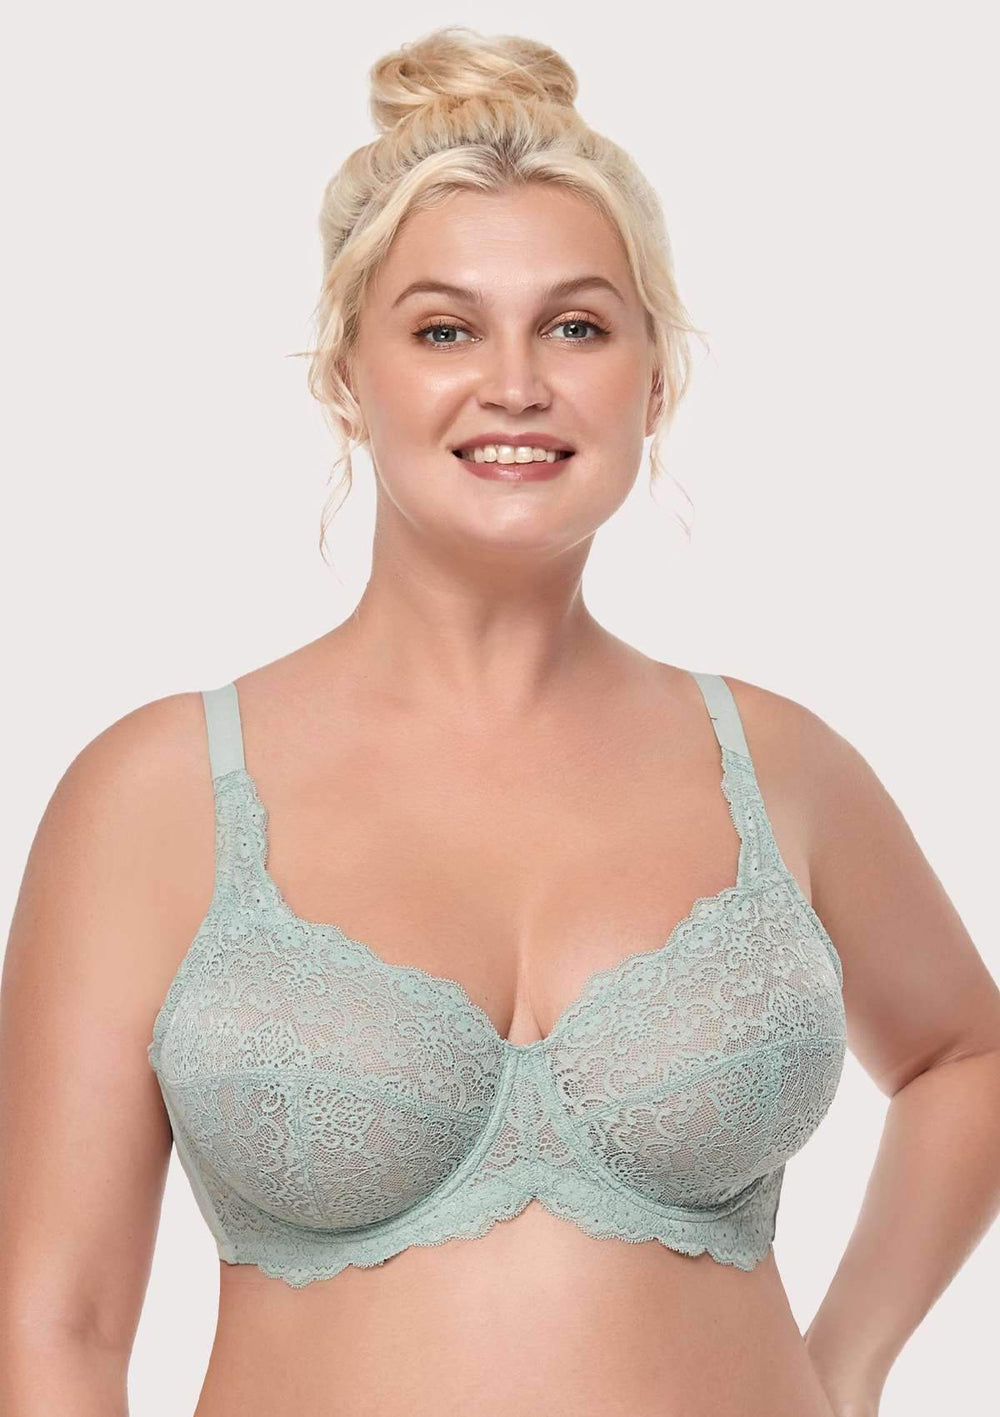 HSIA Blossom Full Figure See-Through Lace Bra for Side and Back Fat